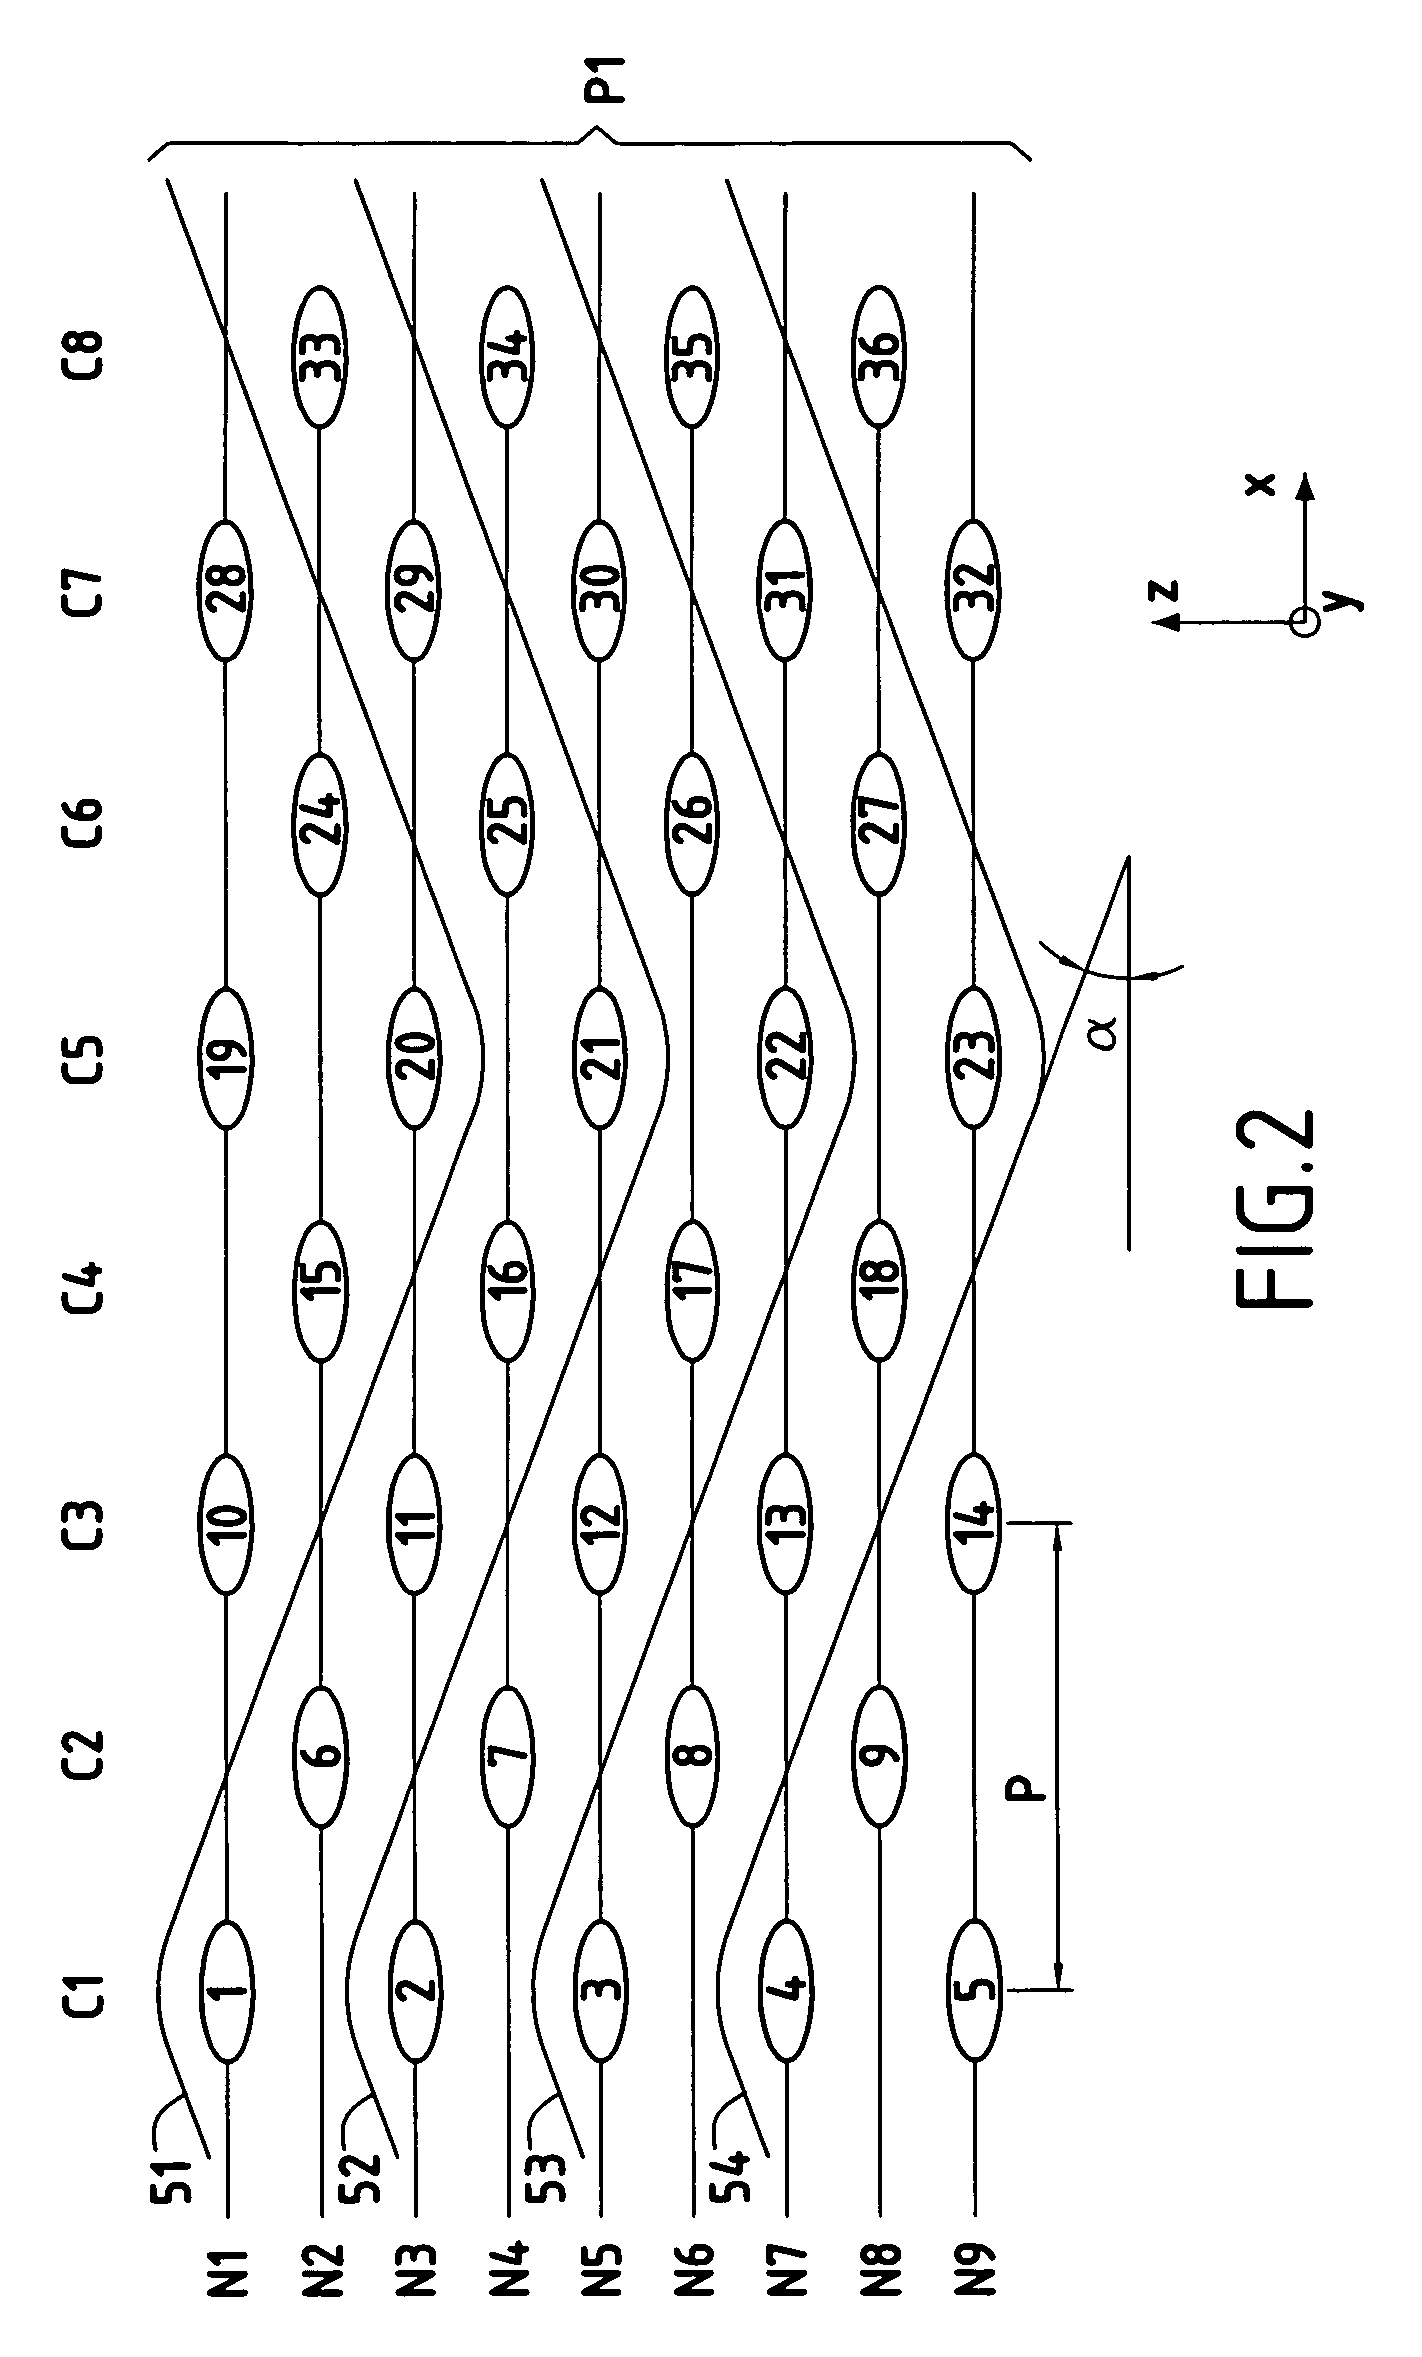 Turbomachine blade, in particular a fan blade, and its method of manufacture